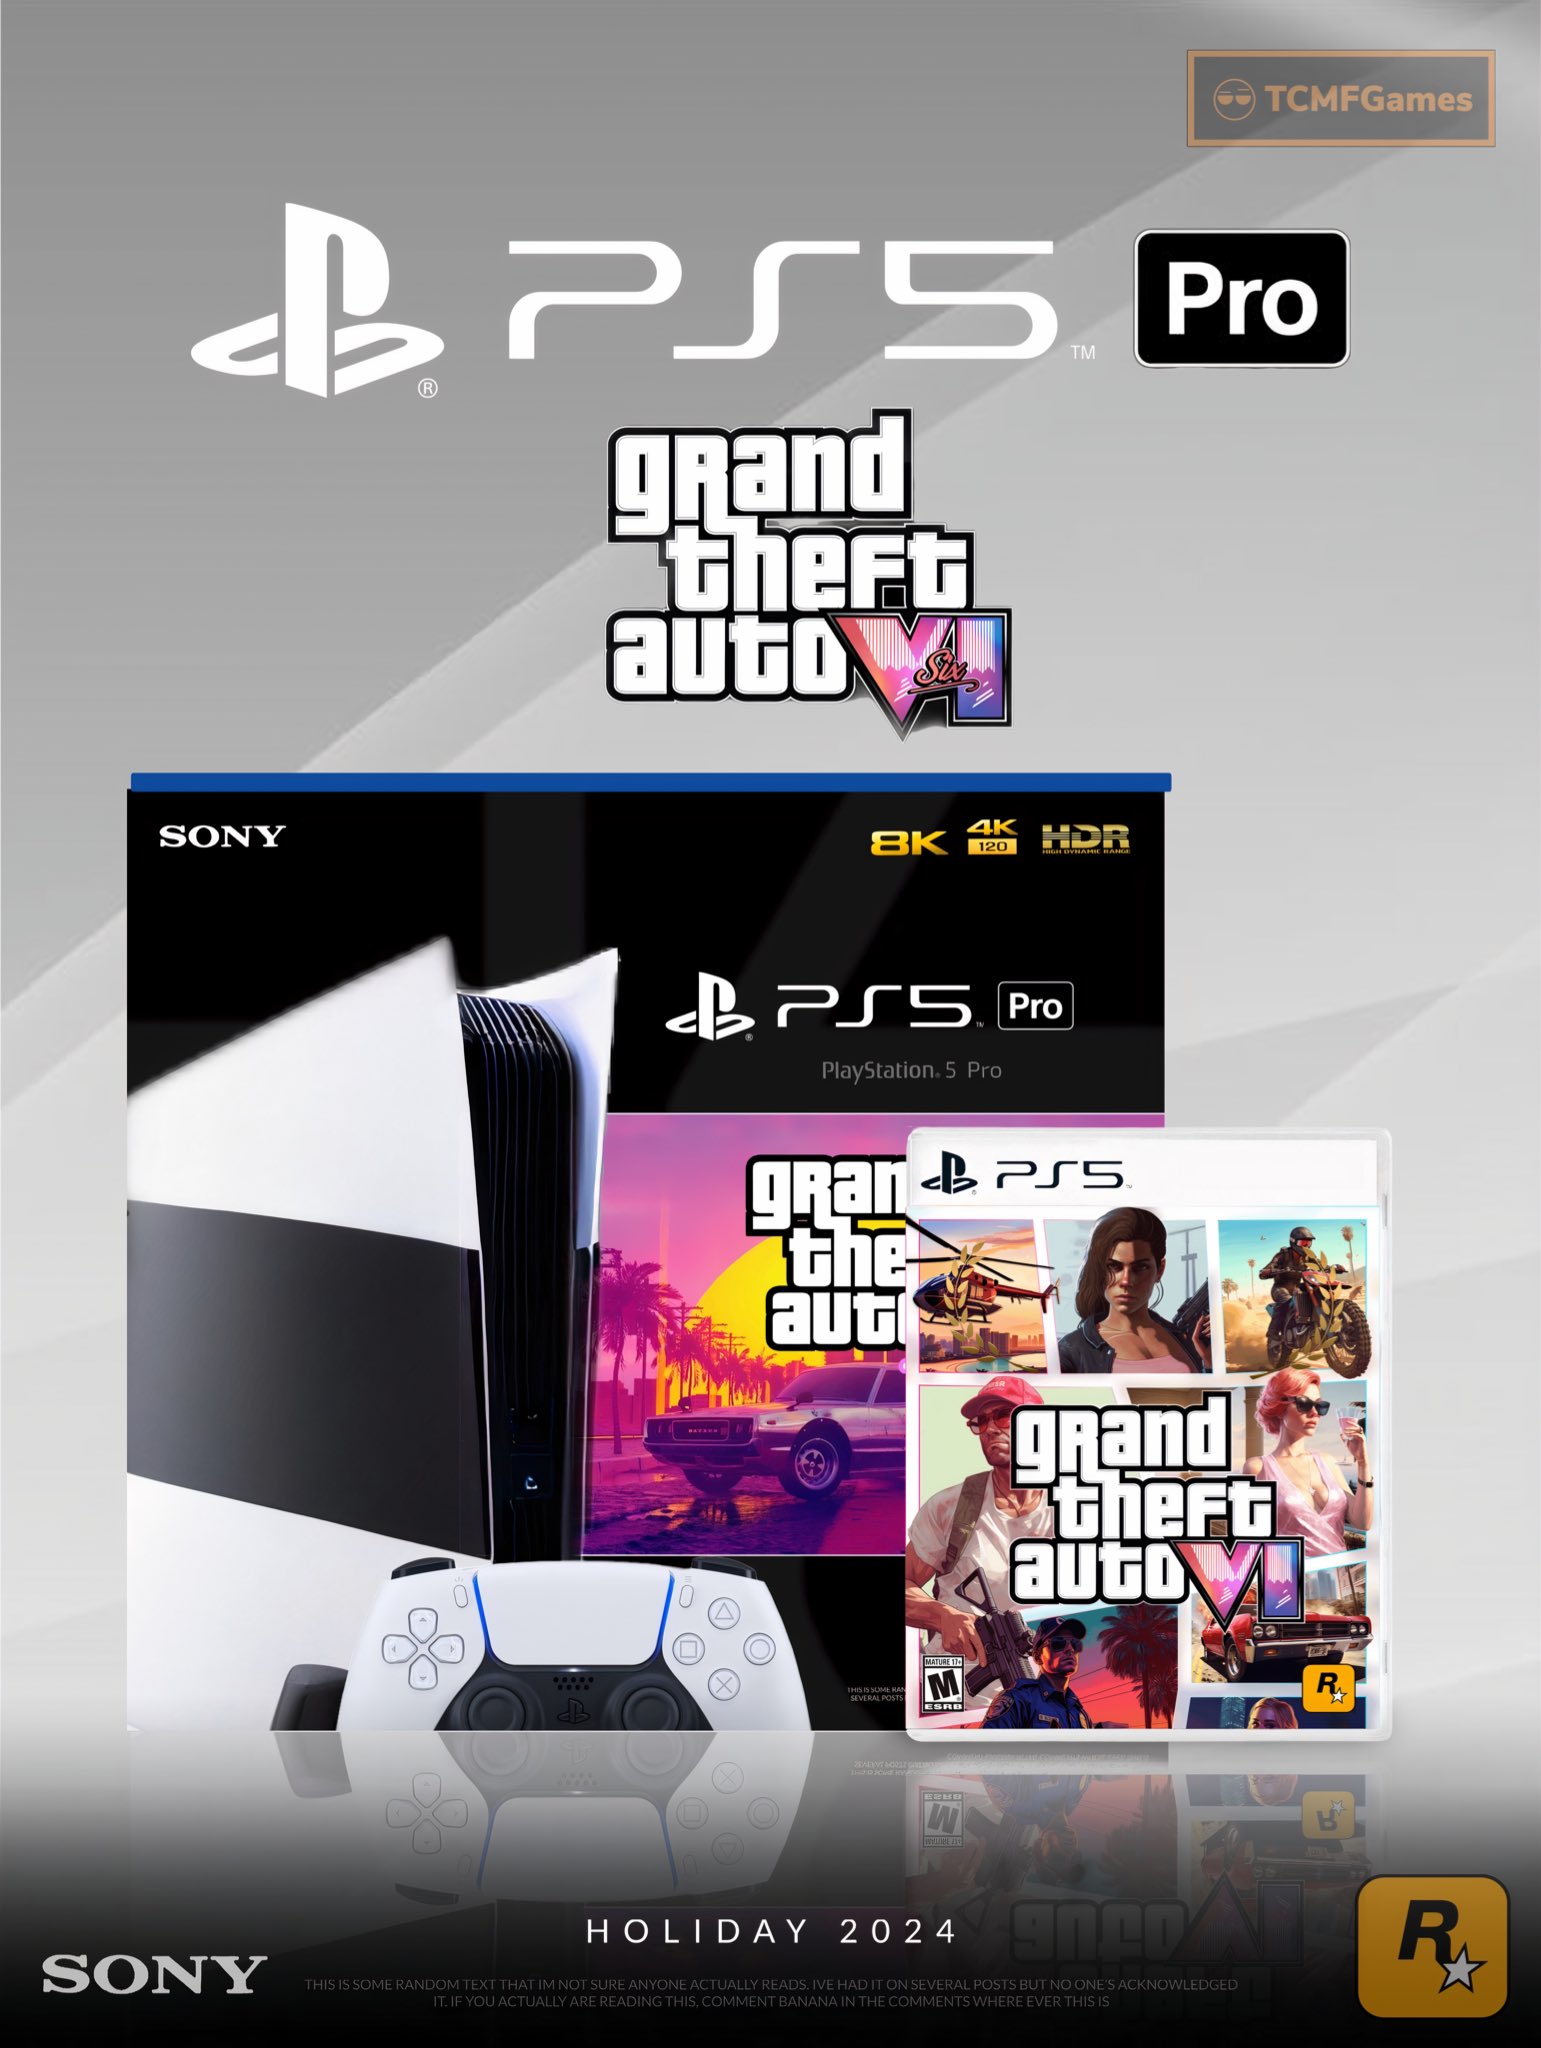 TCMFGames on X: PS5 Pro X GTA 6 This bundle will be wild 👀 • PS5 Pro is  reportedly set to launch in late 2024 • GTA 6 has been confirmed and